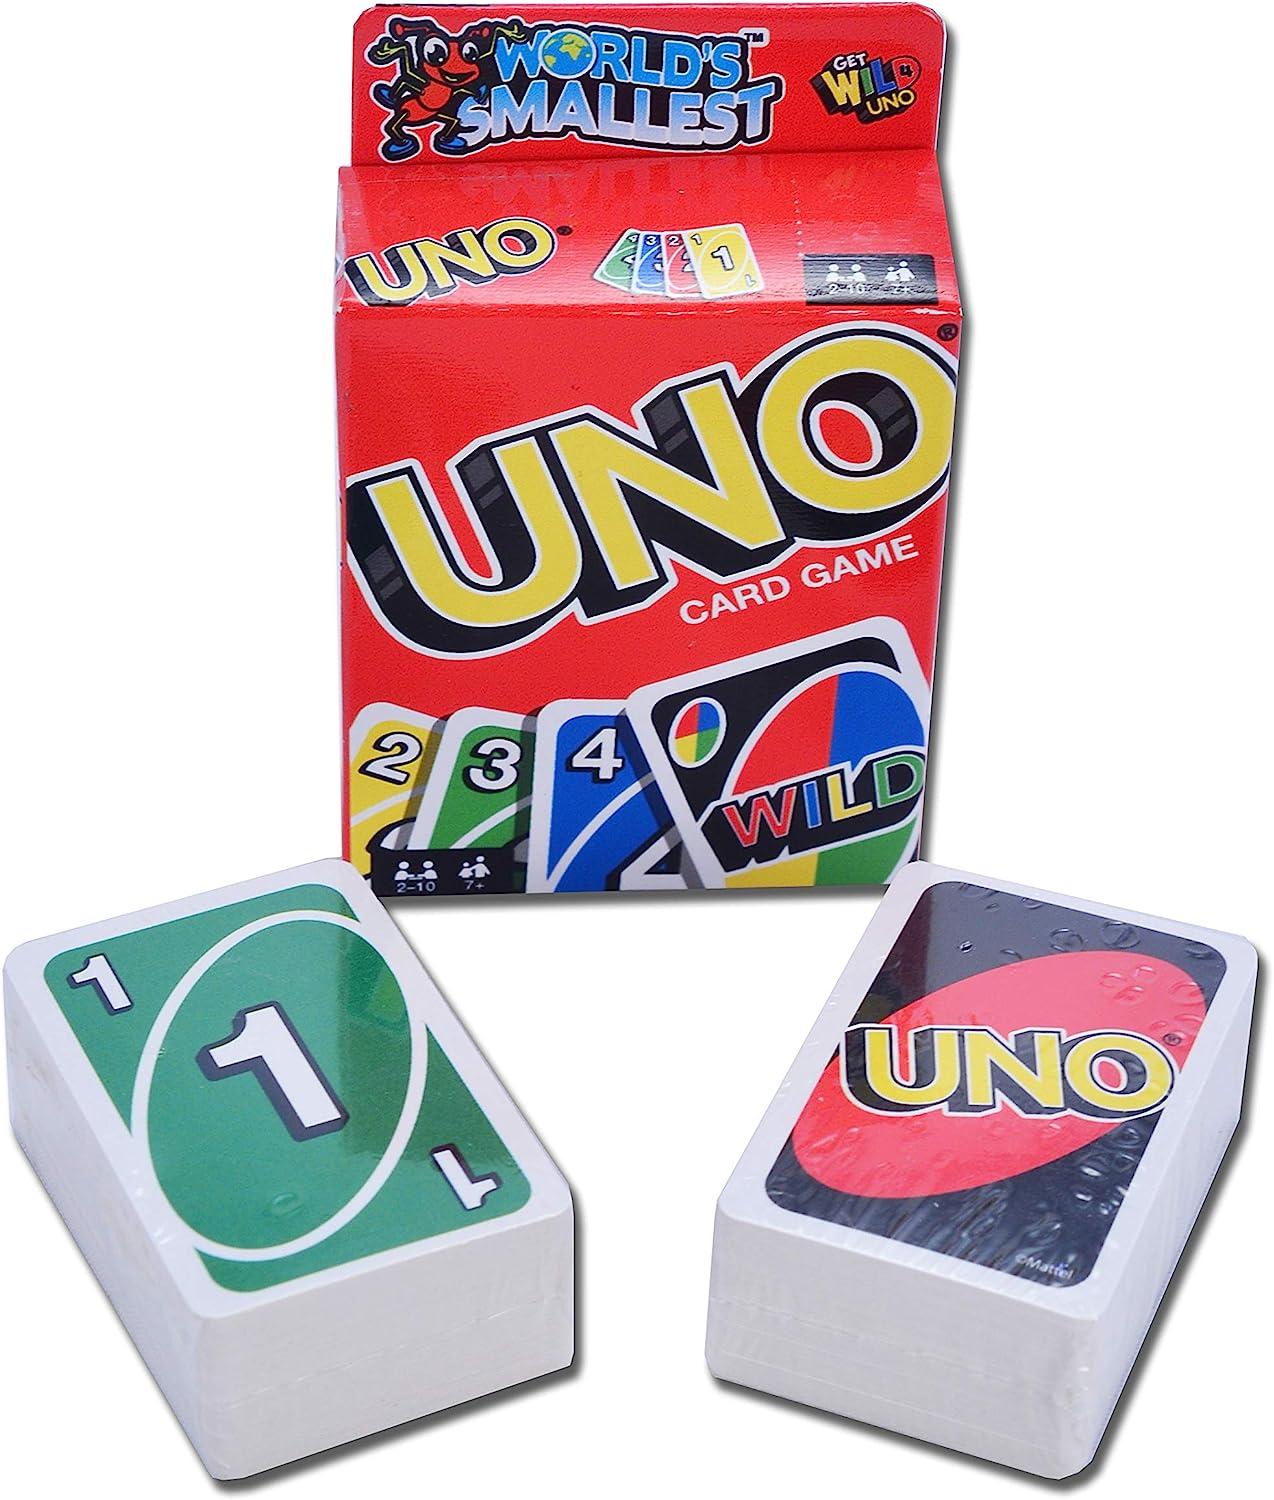 Worlds Smallest UNO Miniature Version of the Classic Card Game